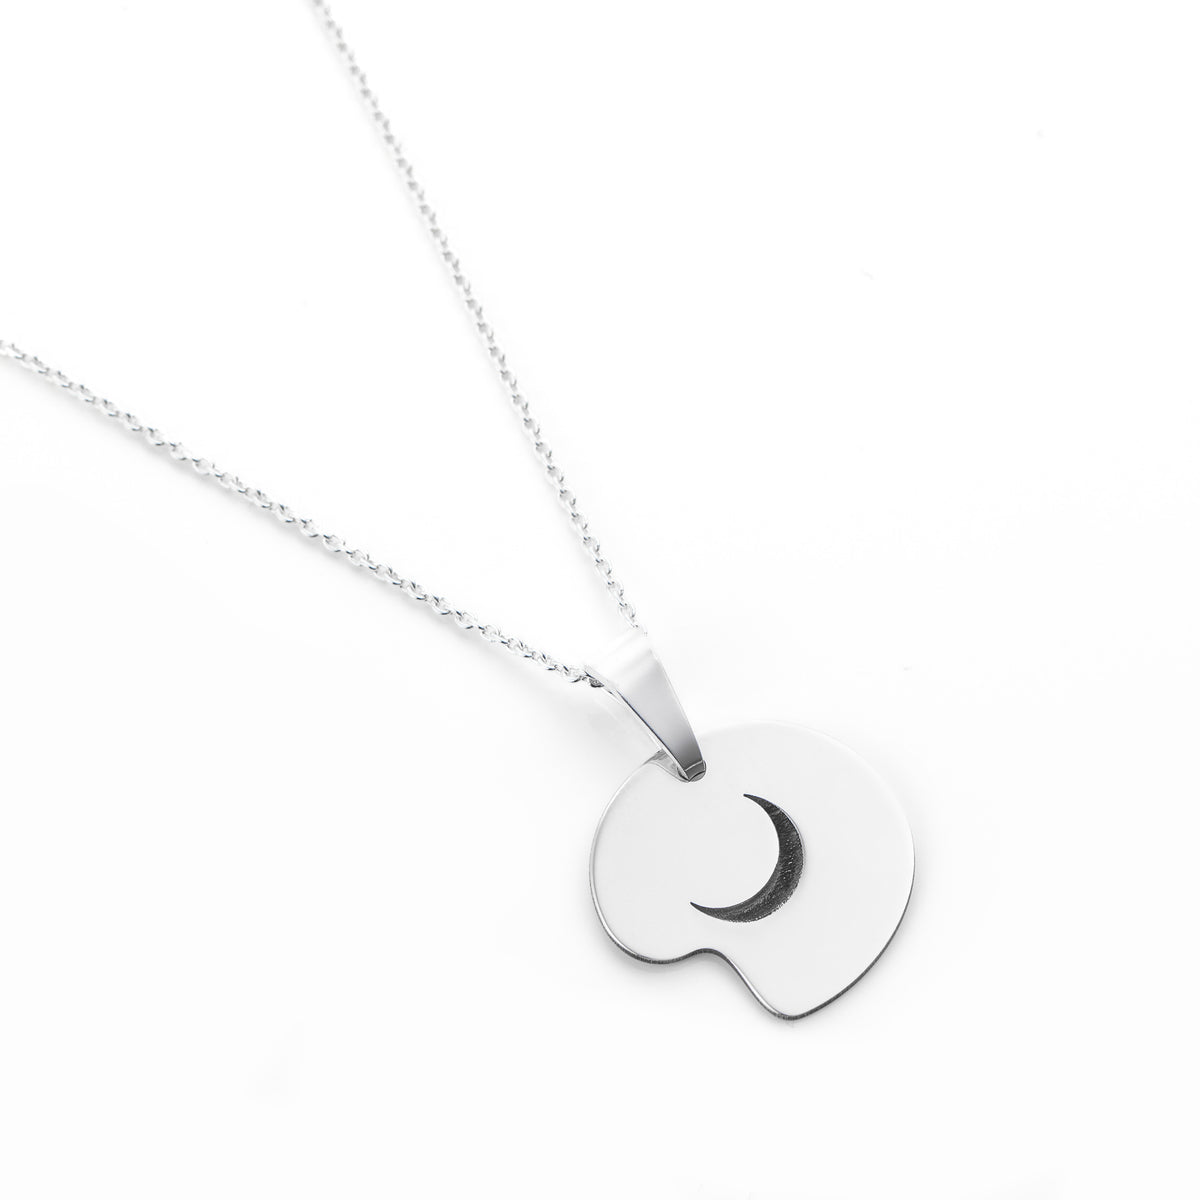 Lost in Dreams Necklace, 925 sterling silver